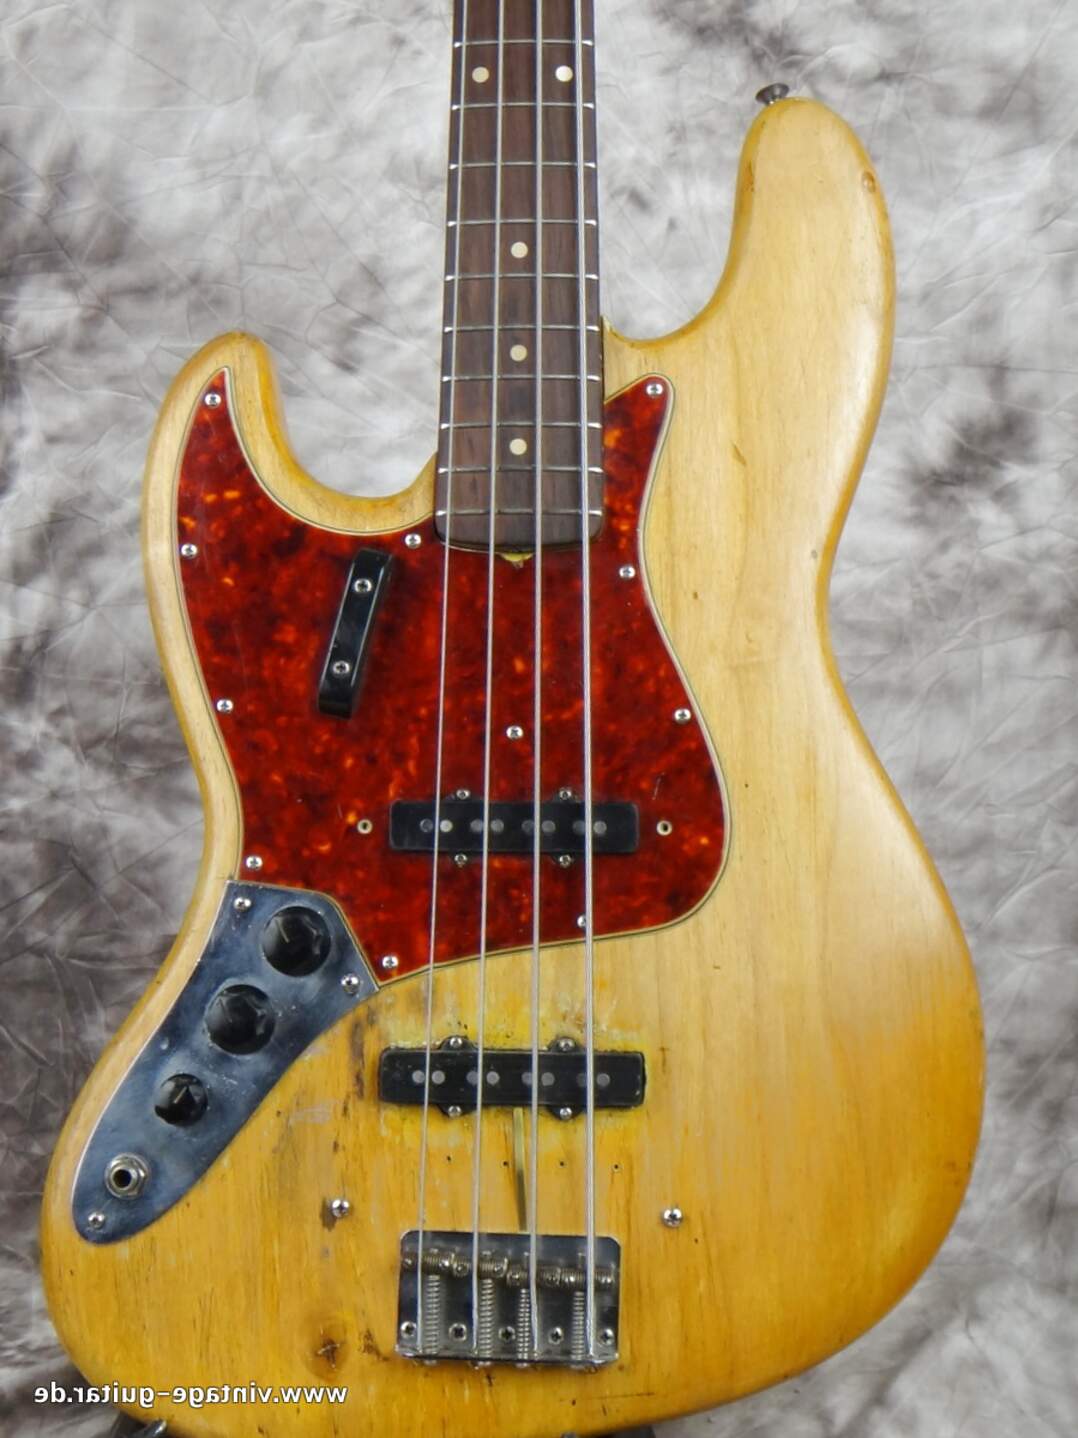 Musicman Bass for sale in UK | 63 used Musicman Bass